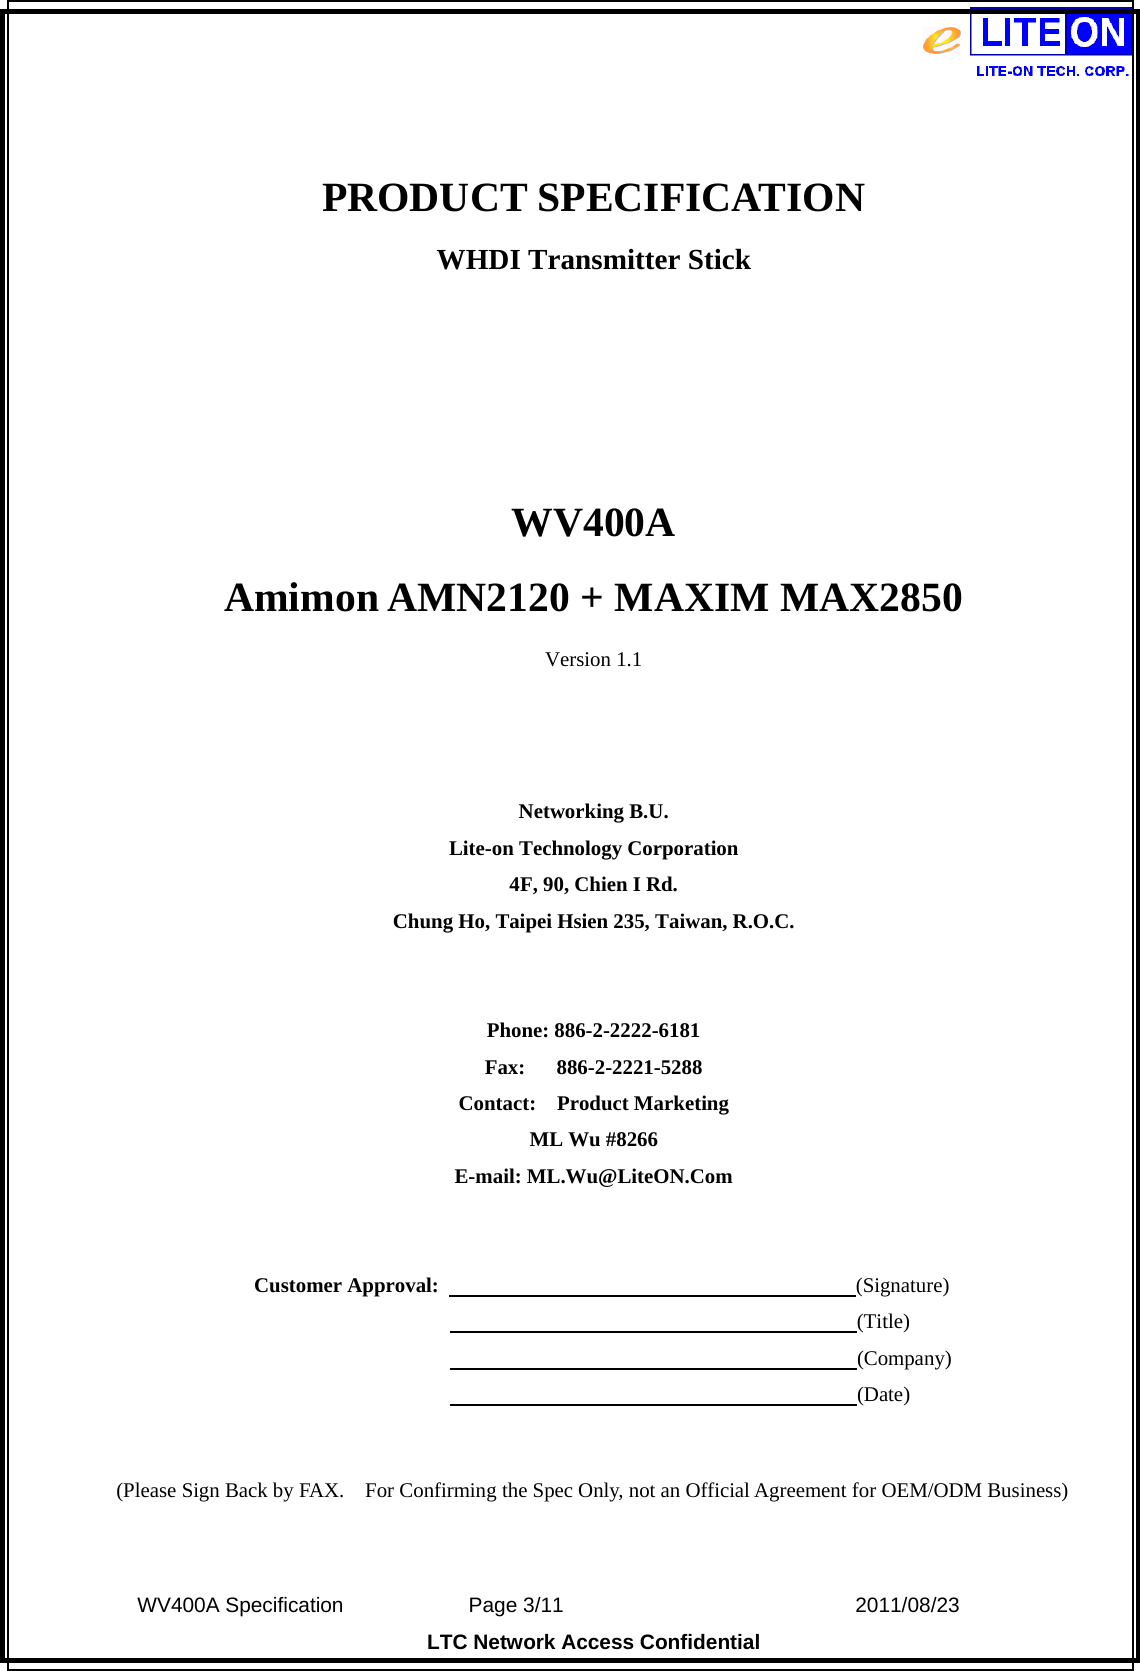  WV400A Specification             Page 3/11                            2011/08/23 LTC Network Access Confidential  PRODUCT SPECIFICATION WHDI Transmitter Stick    WV400A Amimon AMN2120 + MAXIM MAX2850 Version 1.1    Networking B.U. Lite-on Technology Corporation 4F, 90, Chien I Rd. Chung Ho, Taipei Hsien 235, Taiwan, R.O.C.   Phone: 886-2-2222-6181 Fax:   886-2-2221-5288 Contact:  Product Marketing ML Wu #8266 E-mail: ML.Wu@LiteON.Com     Customer Approval:                                        (Signature)                                                                      (Title)                                                                      (Company)                                                                      (Date)   (Please Sign Back by FAX.    For Confirming the Spec Only, not an Official Agreement for OEM/ODM Business) 